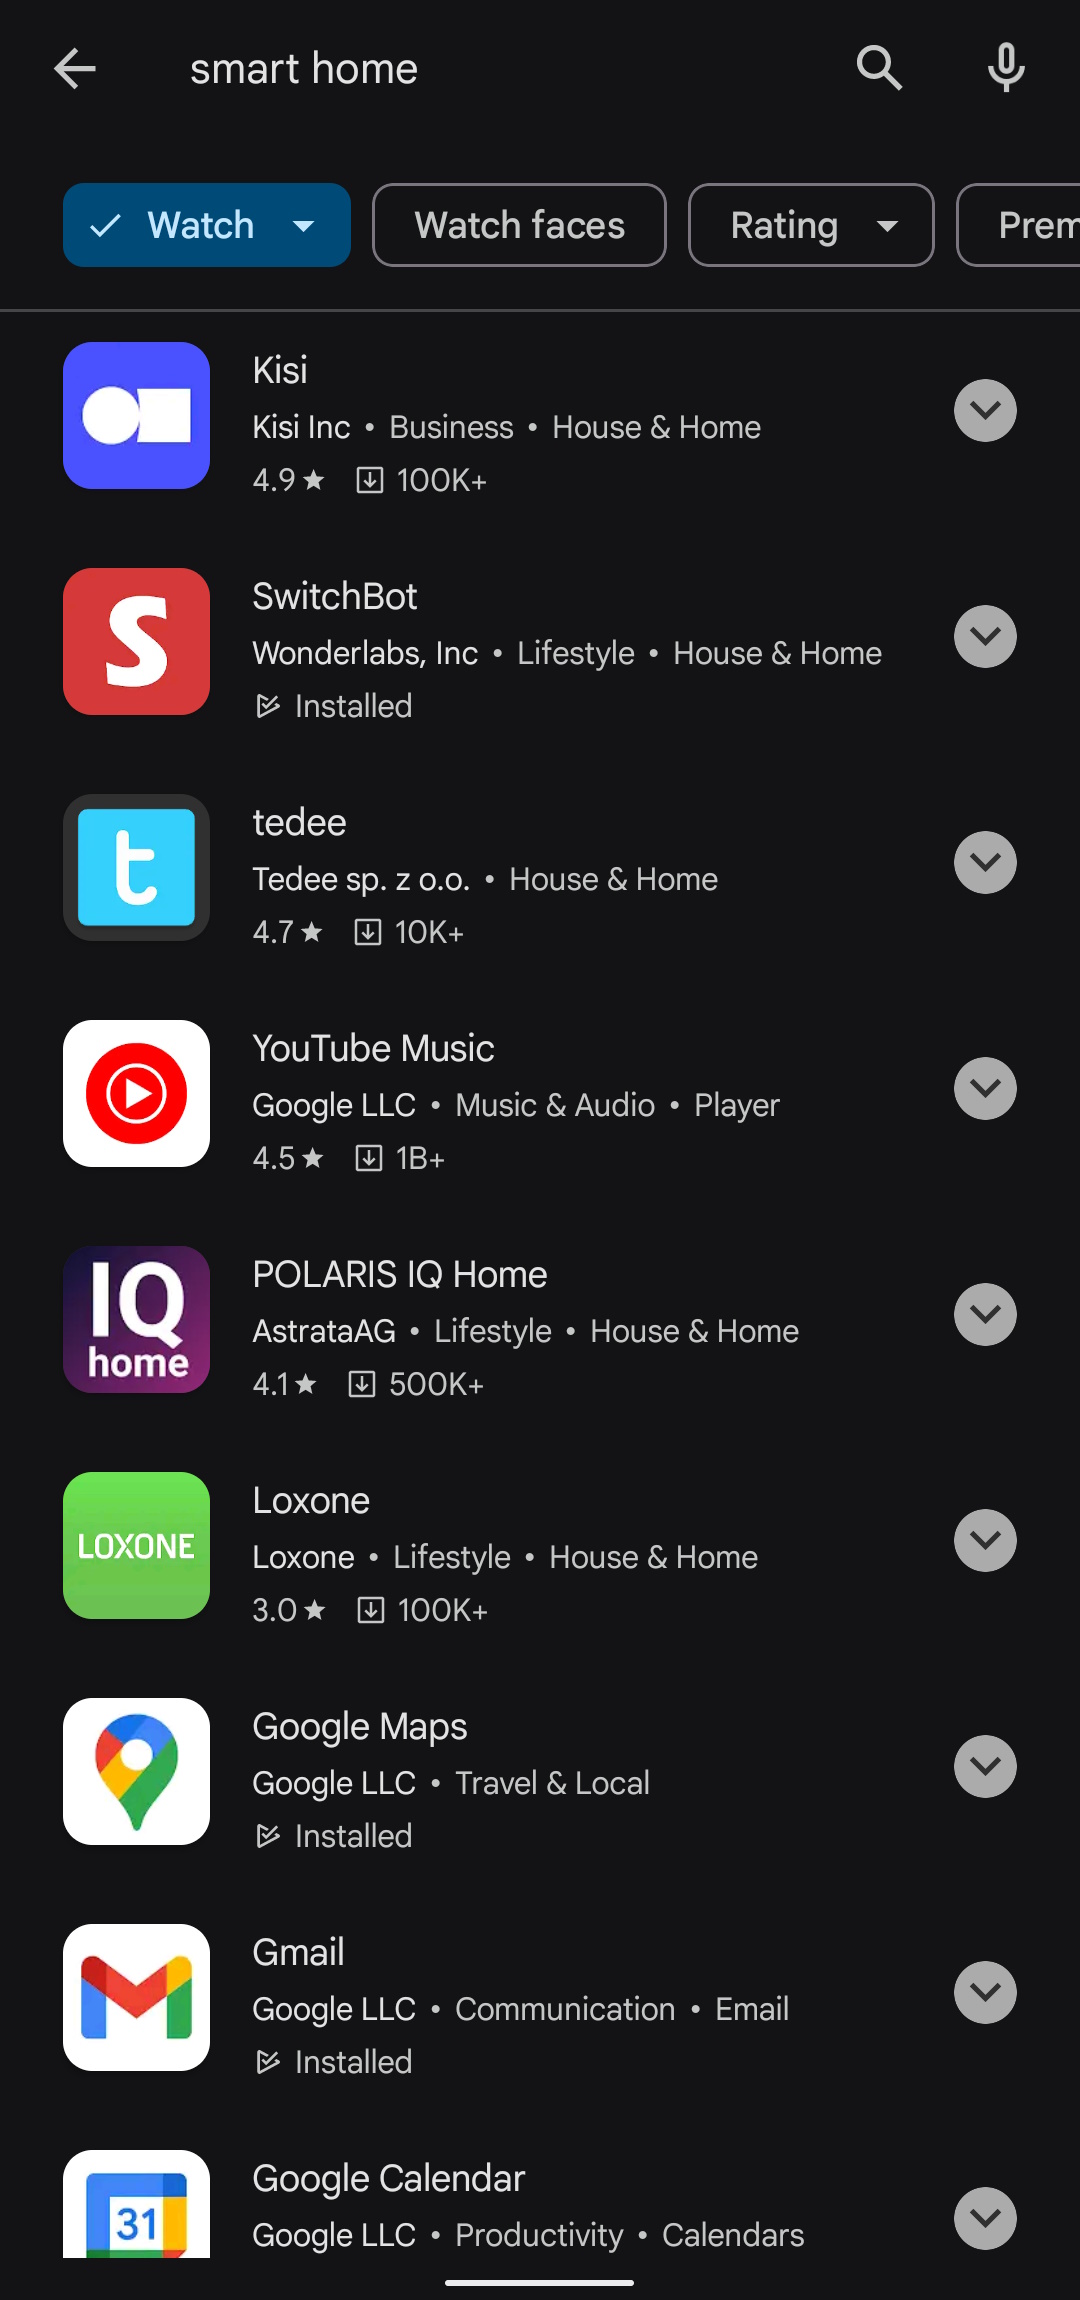 Other smart home apps